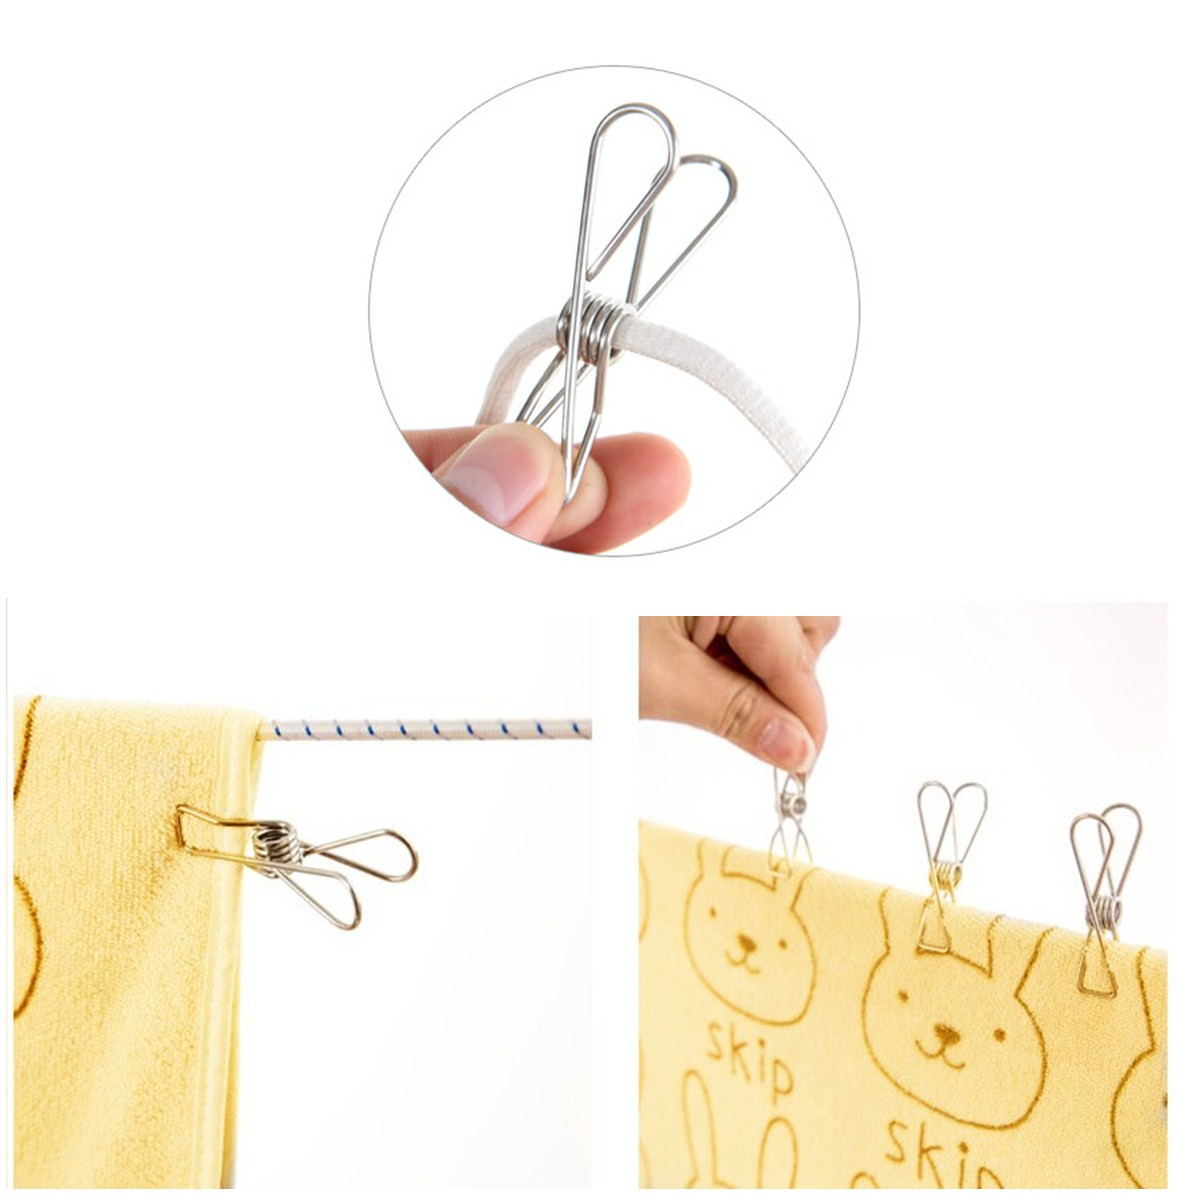 Sulevetrade-SSCH01-20Pcs-Stainless-Steel-Clothes-Pegs-Metal-Clips-Hanger-for-Socks-Underwear-Towel-S-1140045